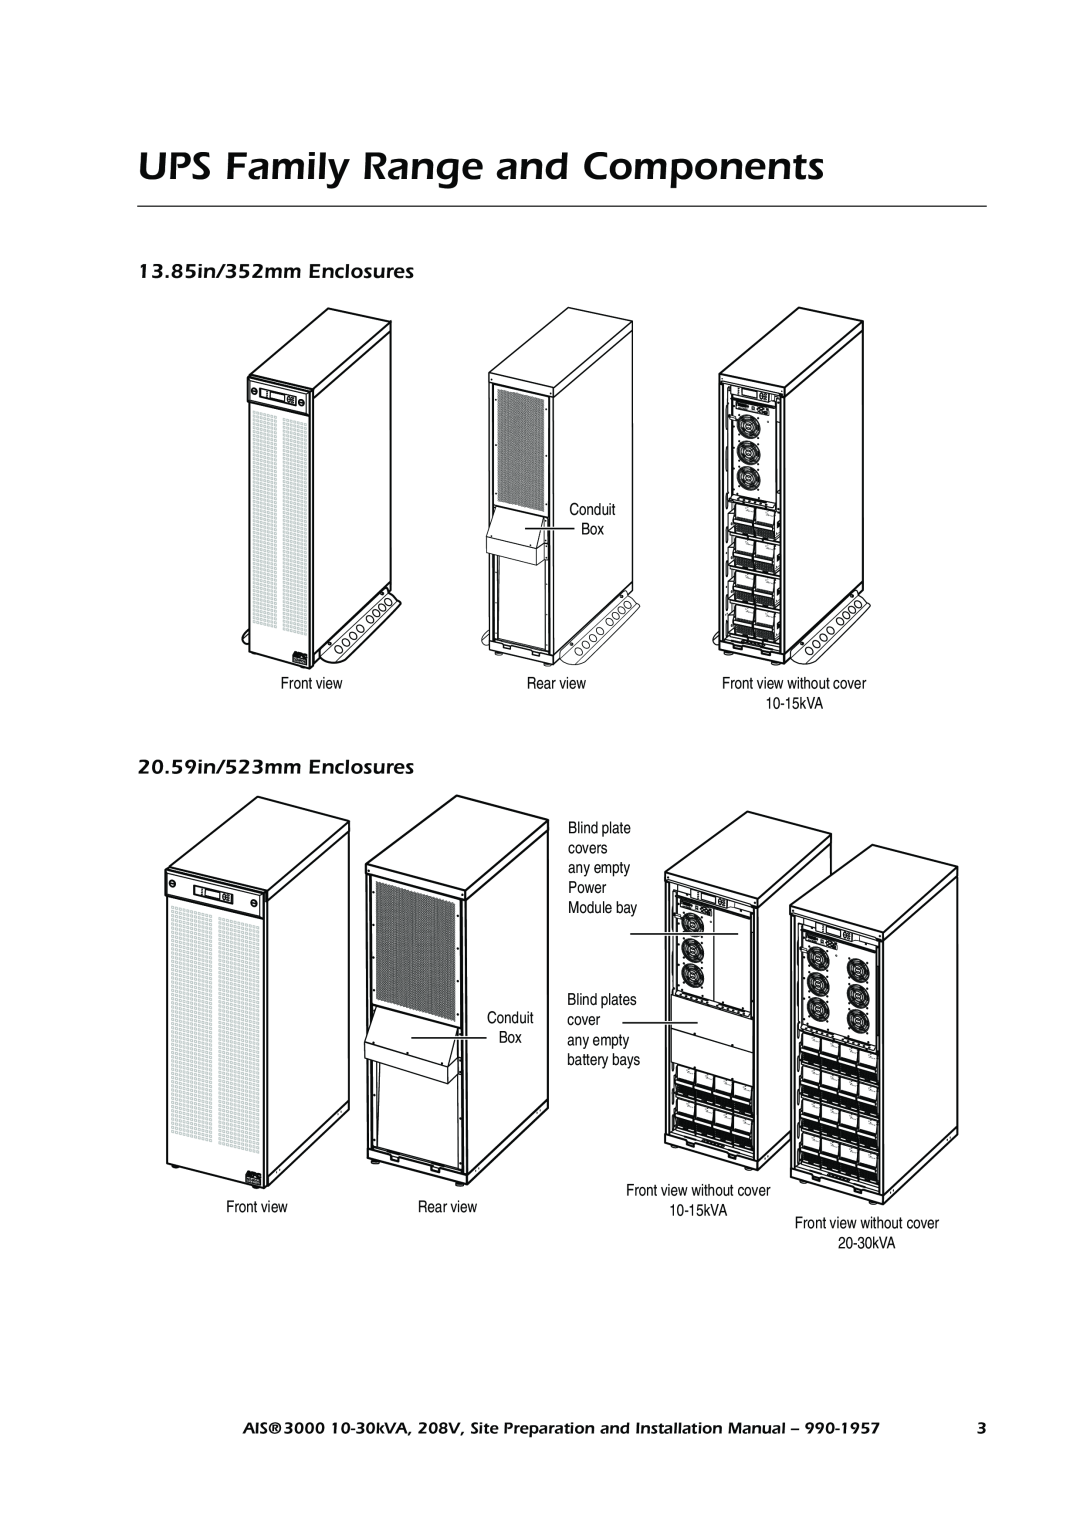 APC 3000 installation manual UPS Family Range and Components, 13.85in/352mm Enclosures, 20.59in/523mm Enclosures 